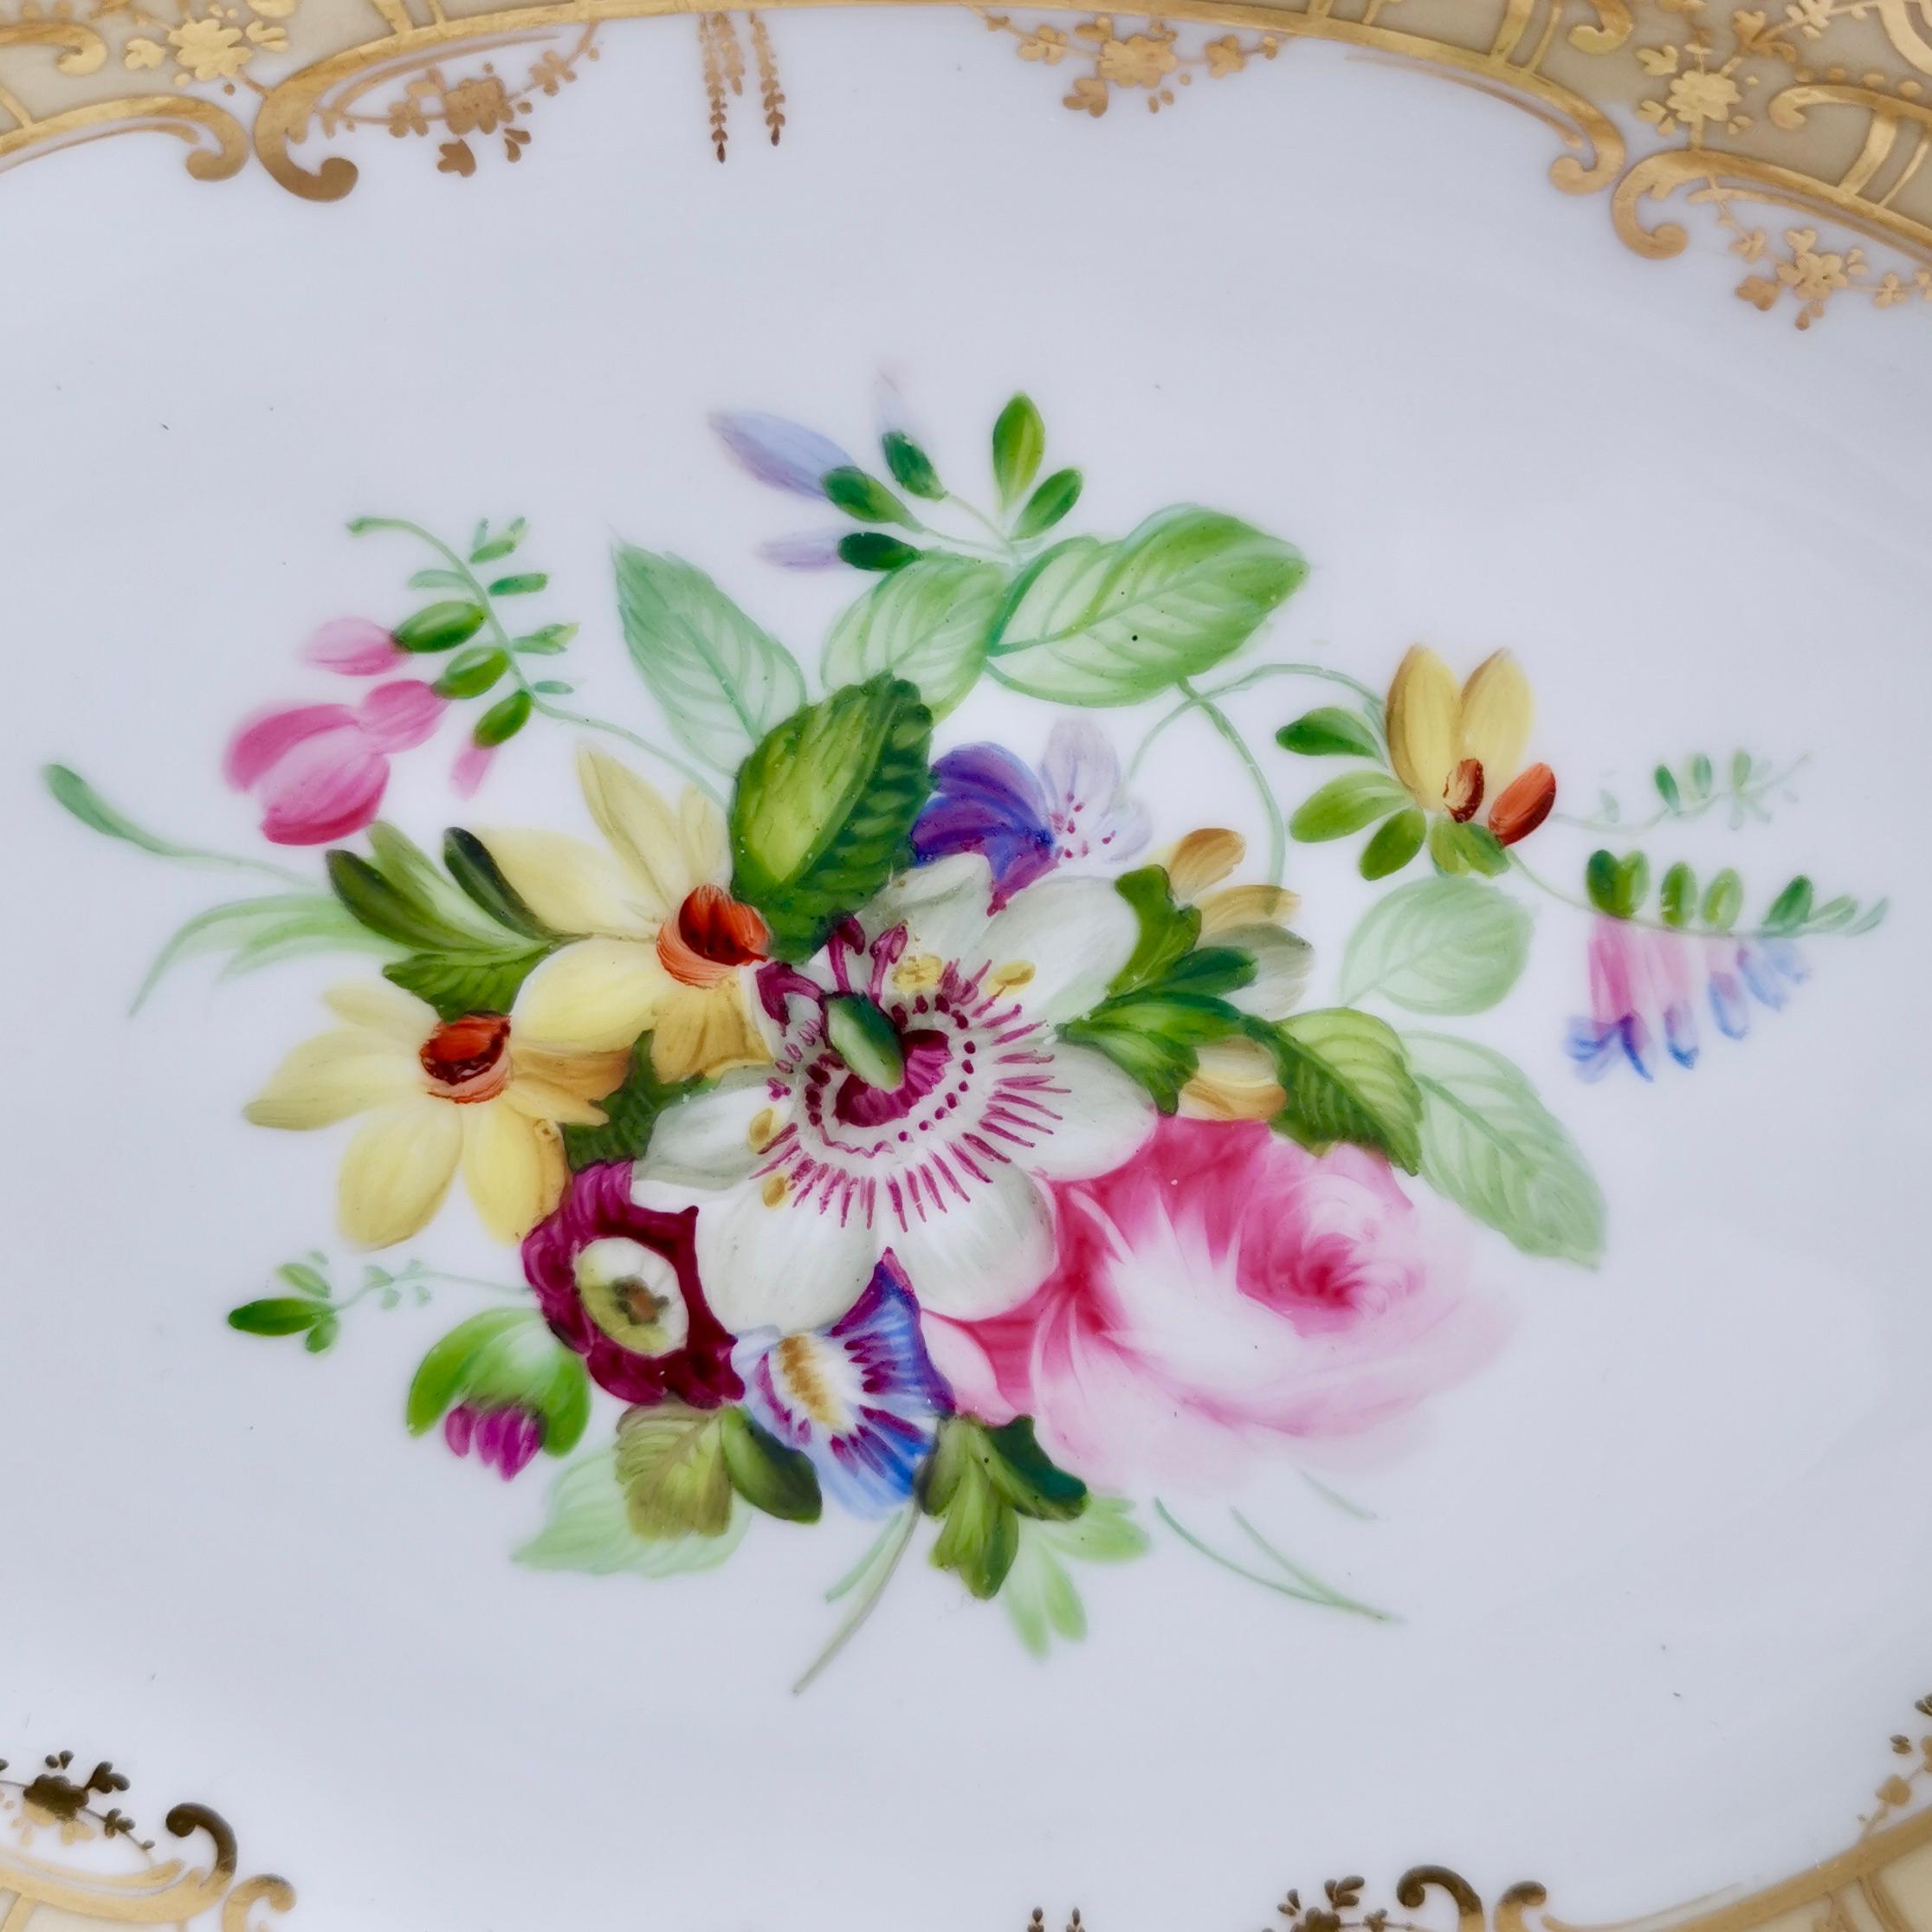 Hand-Painted Coalport Set of 2 Oval Dessert Dishes, Beige with Flowers by Thomas Dixon, 1847